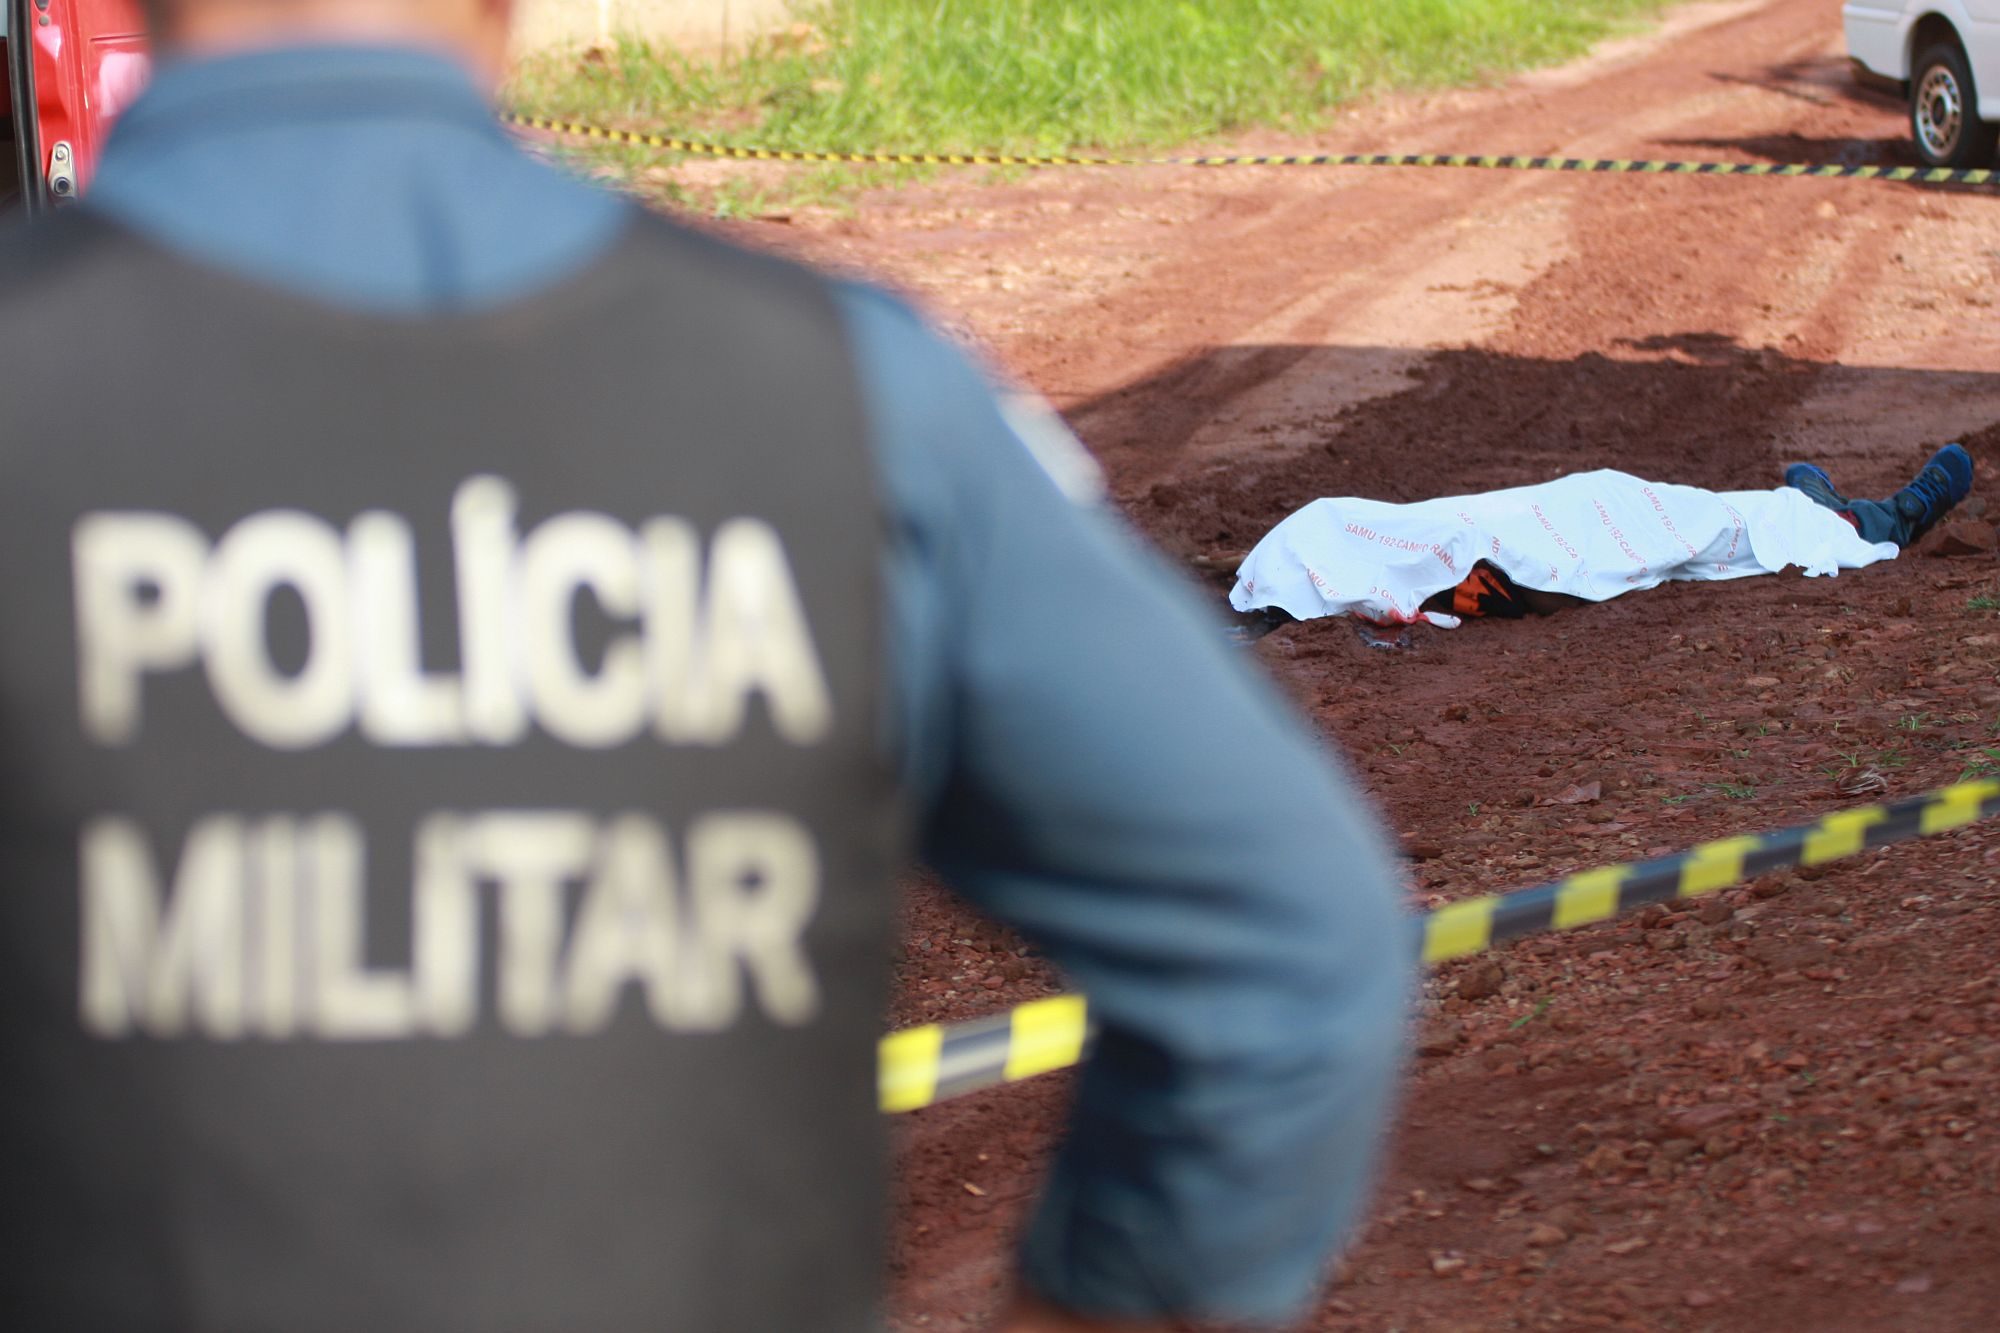 The average annual rate for violent deaths in Brazil is 29.9 murders per 100,000 inhabitants - Photo: Warren Nabuco